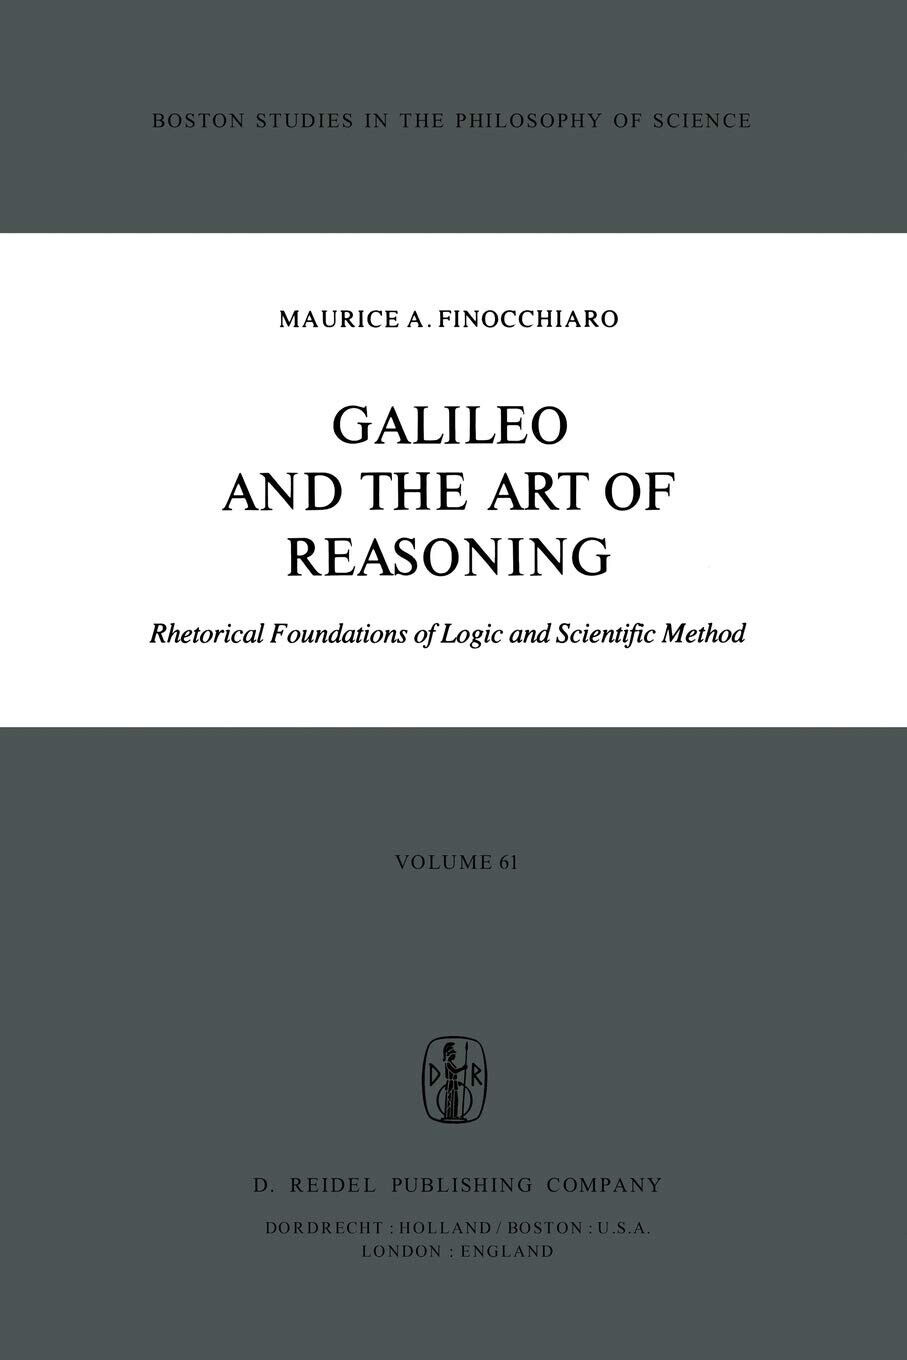 Galileo and the Art of Reasoning - Maurice A. Finocchiaro - Spinger, 1980